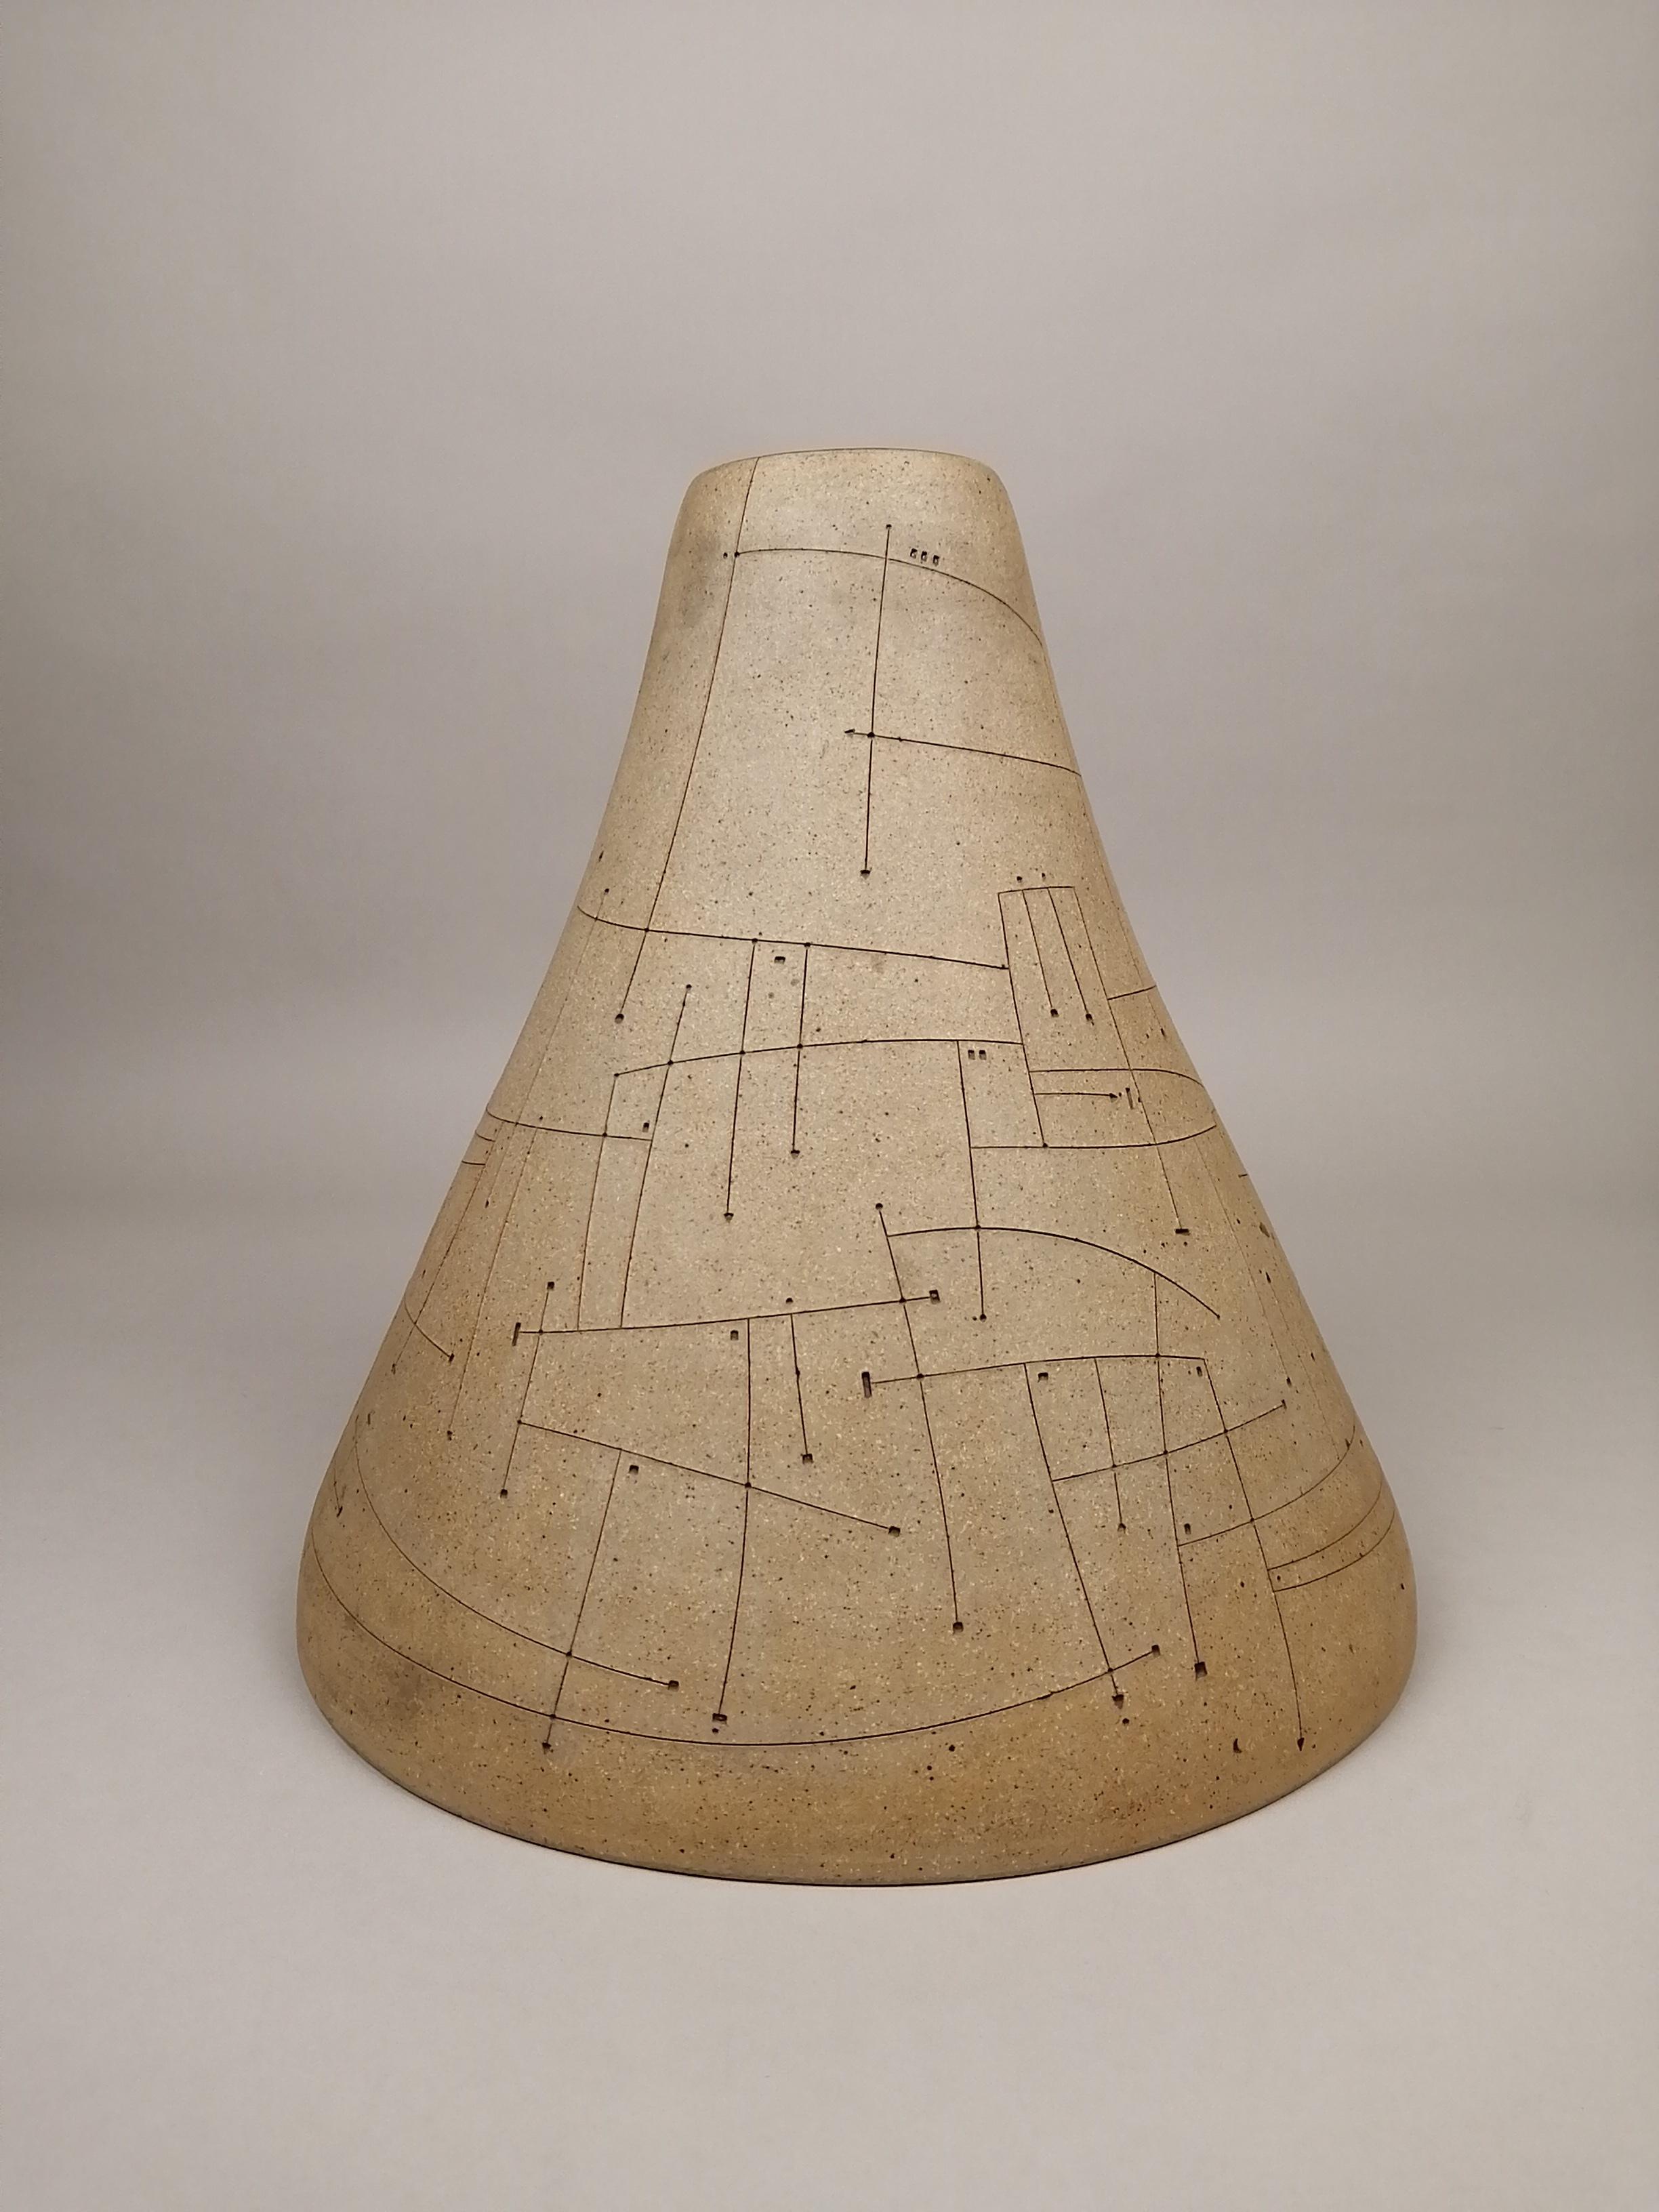 High temperature ceramic vessel by Gustavo Pérez. The cone-shaped vase has black interior and sand color exterior. The exterior is decorated with bas-relief black lines. Hand-crafted one-of-a-kind vase numbered 543 and dated 1992.

Gustavo Pérez